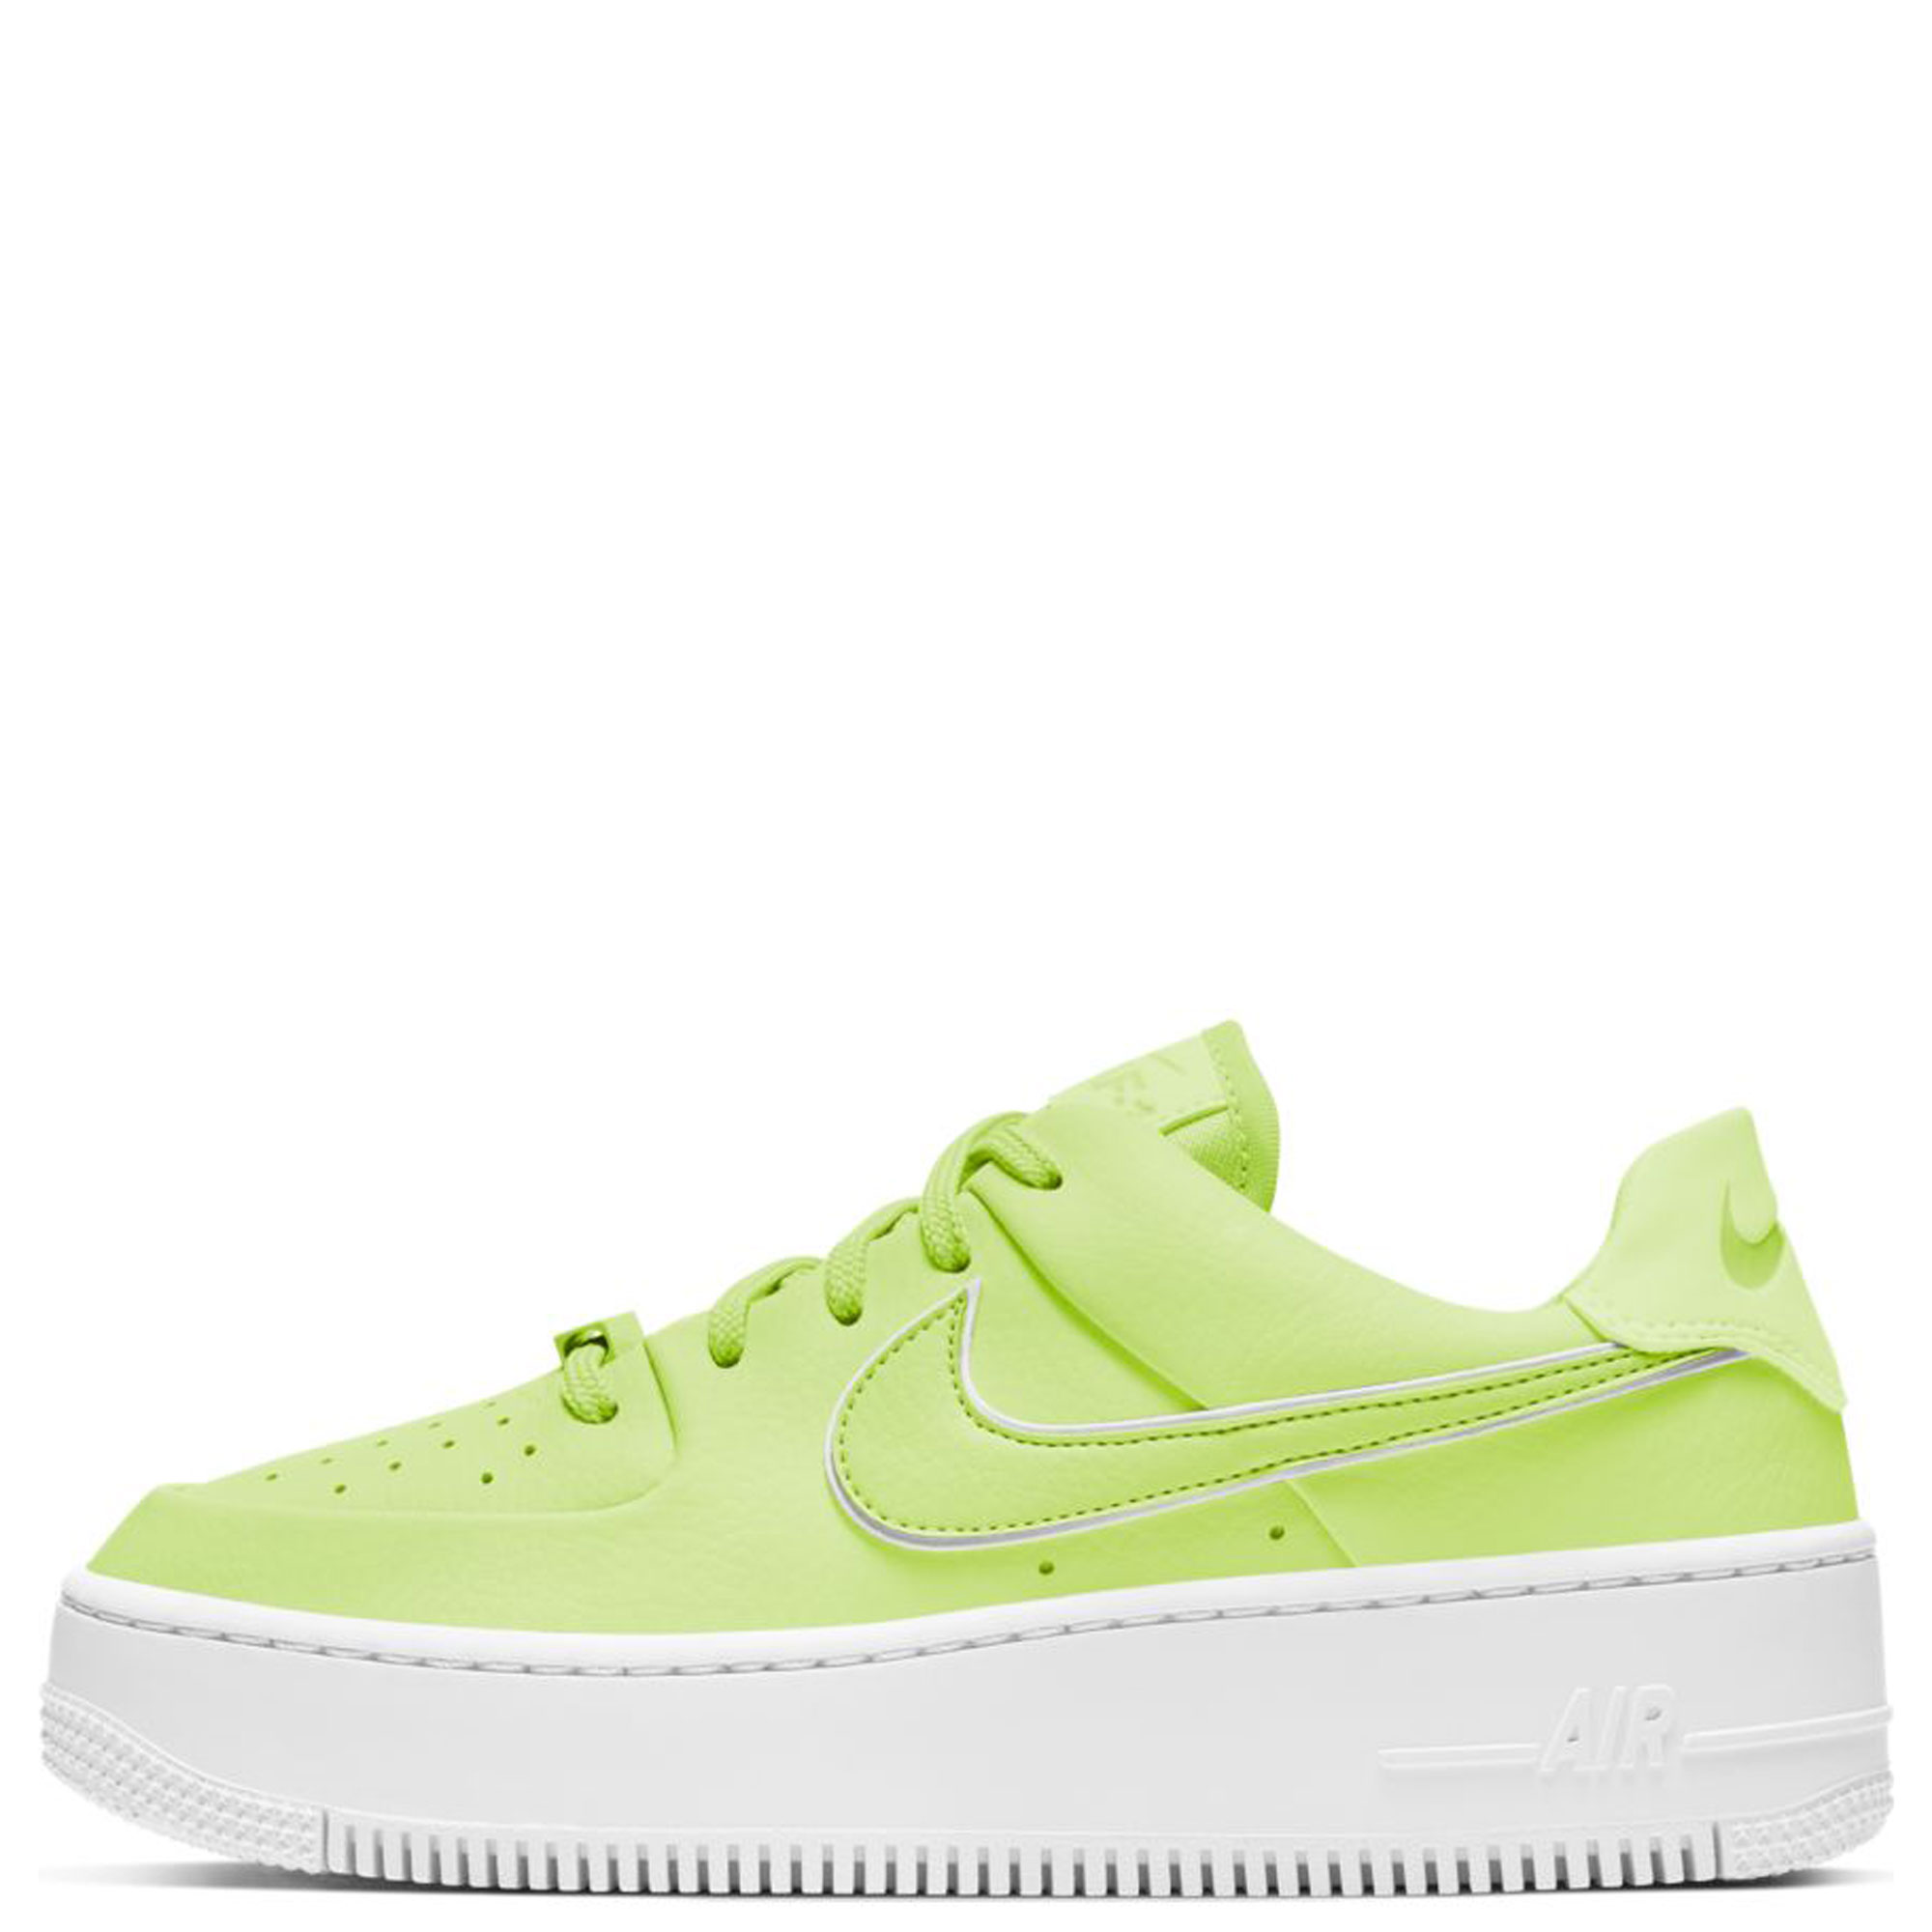 create infrastructure Join NIKE Air Force 1 Sage Low CJ1642 700 - Shiekh